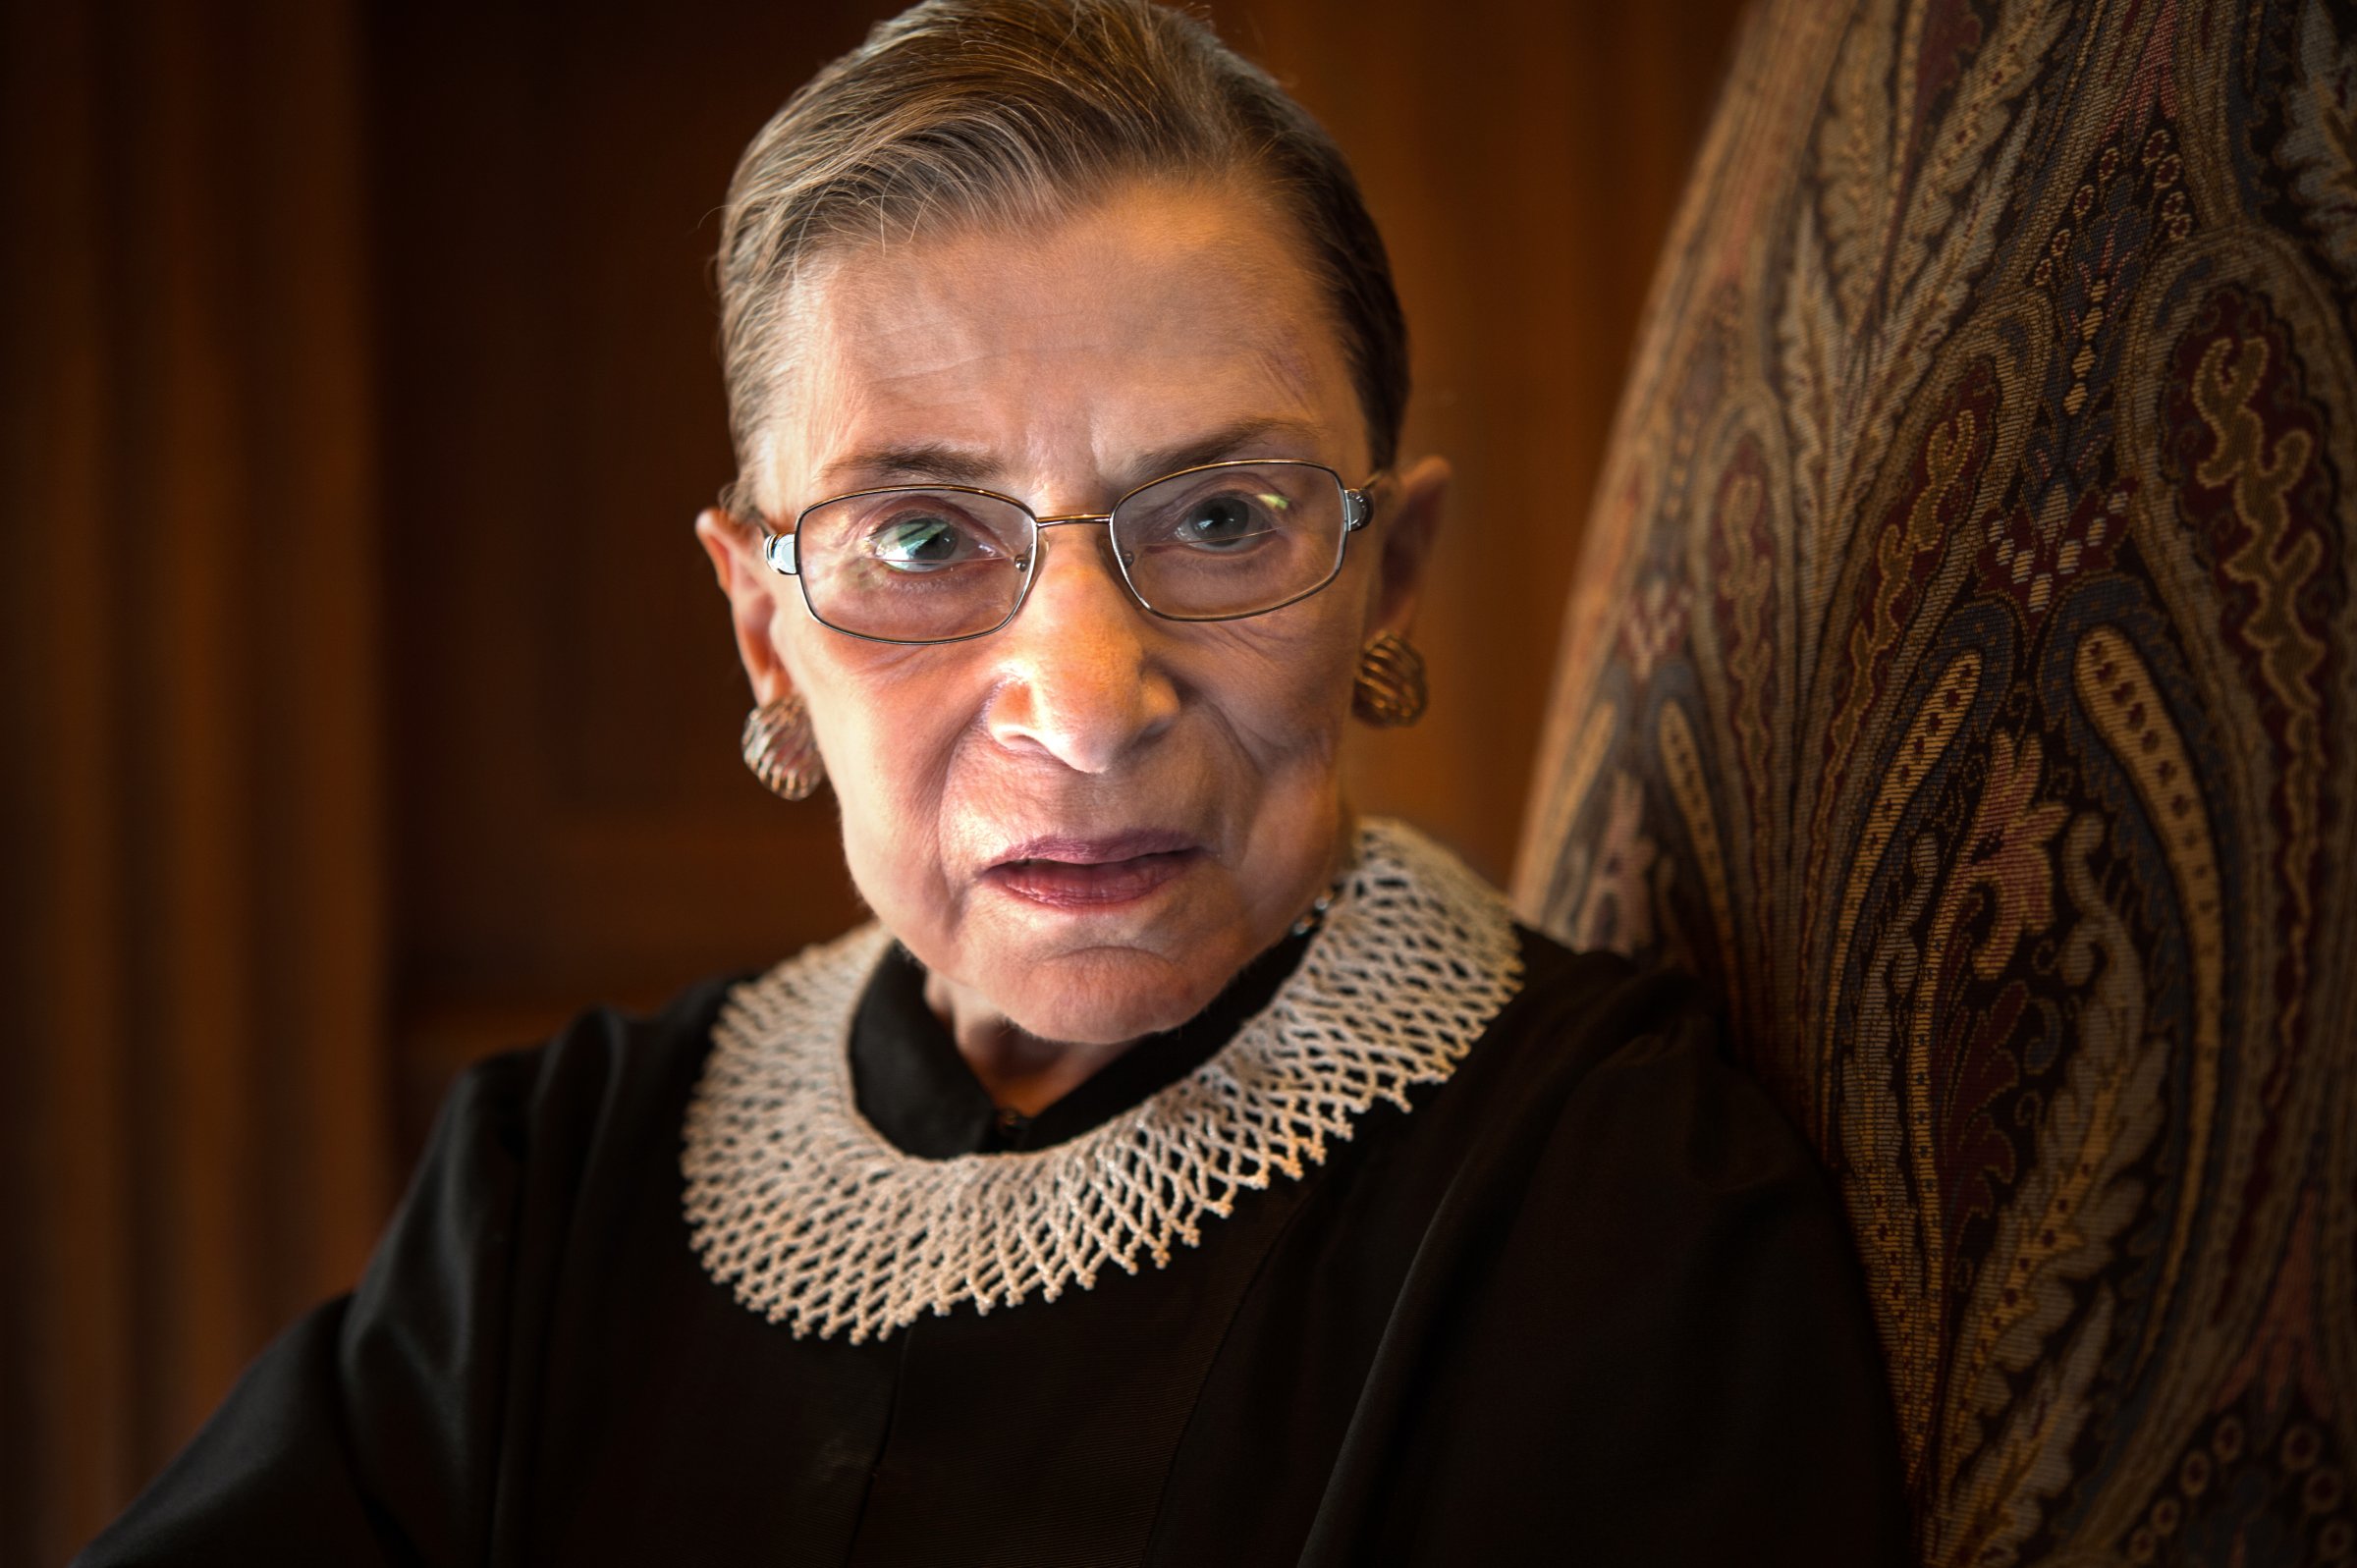 Supreme Court Justice Ruth Bader Ginsburg, celebrating her 20th anniversary on the bench, is photographed in the West conference room at the U.S. Supreme Court in Washington on Aug. 30, 2013.